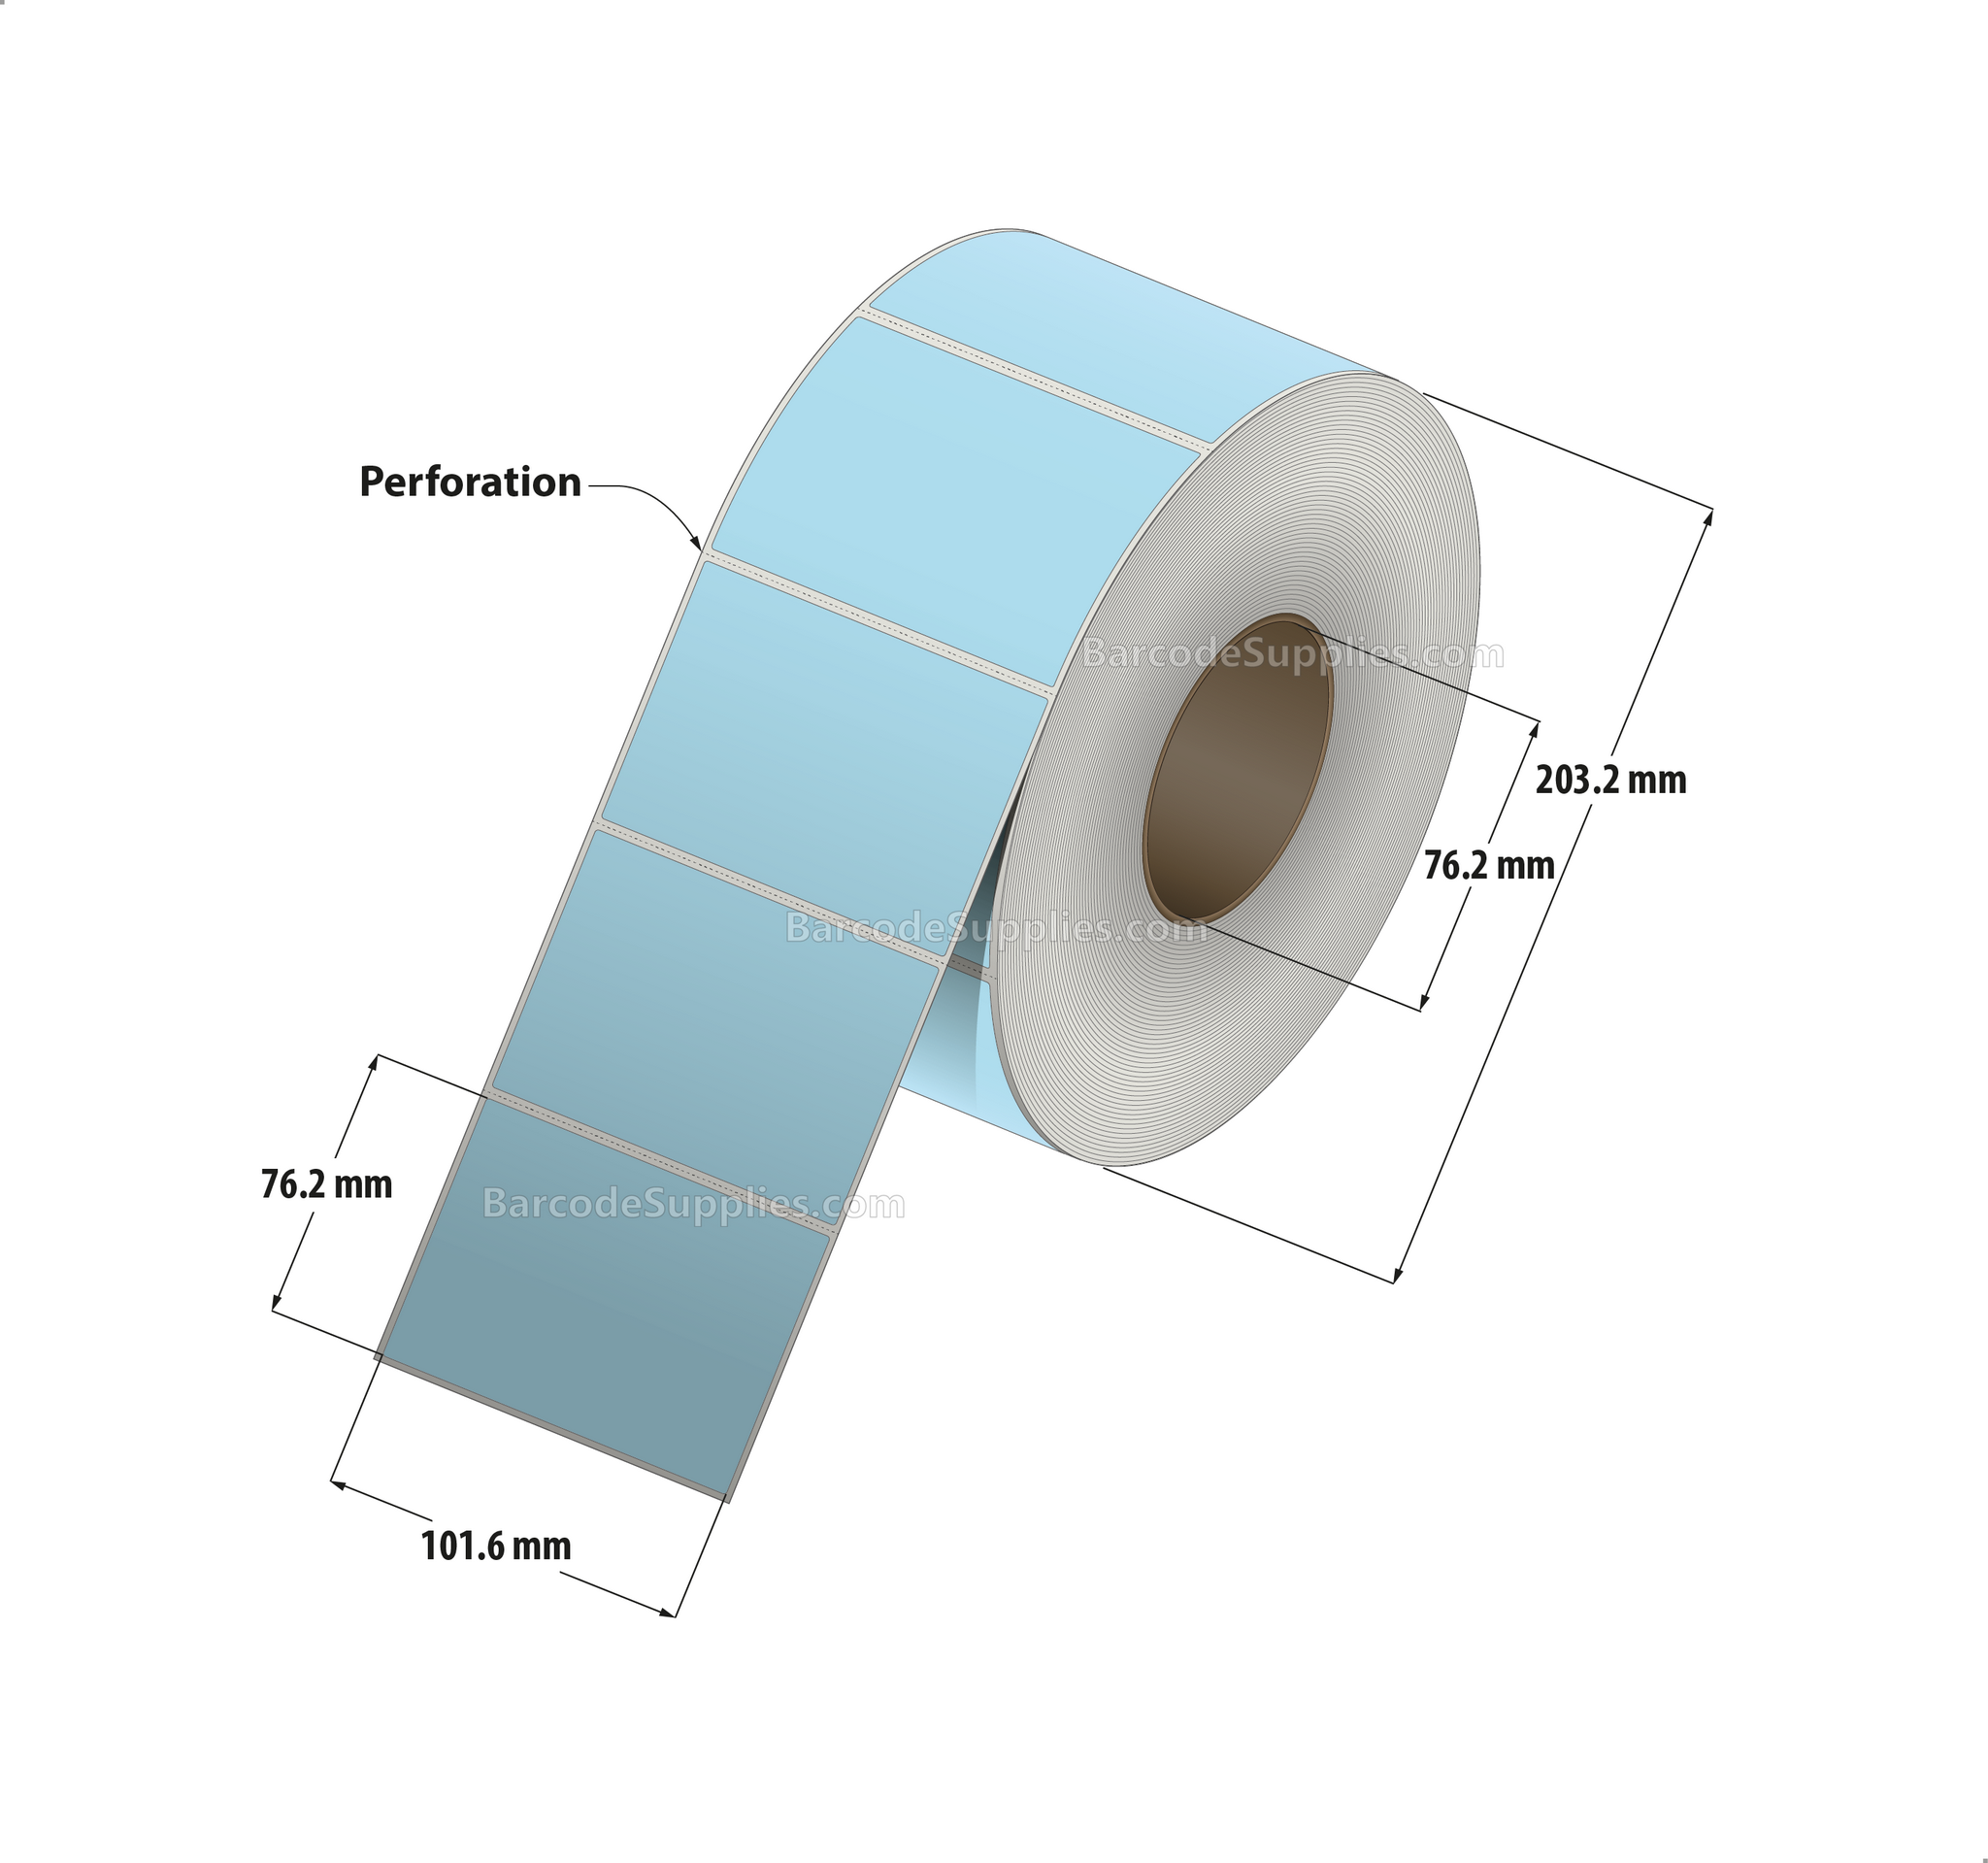 4 x 3 Thermal Transfer 290 Blue Labels With Permanent Adhesive - Perforated - 1900 Labels Per Roll - Carton Of 4 Rolls - 7600 Labels Total - MPN: RFC-4-3-1900-BL